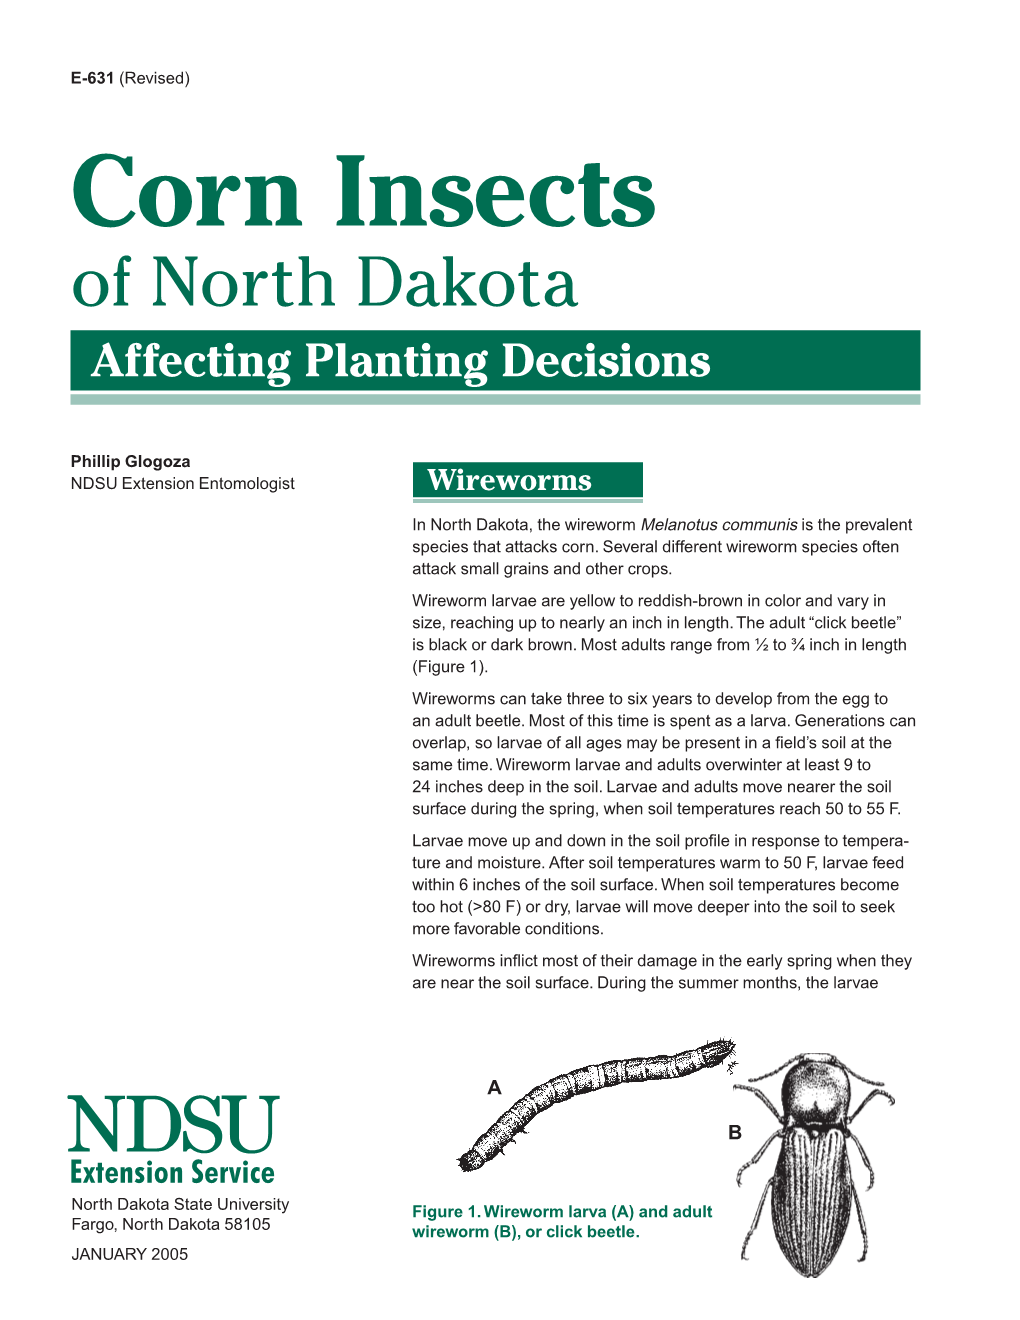 Corn Insects of North Dakota Affecting Planting Decisions